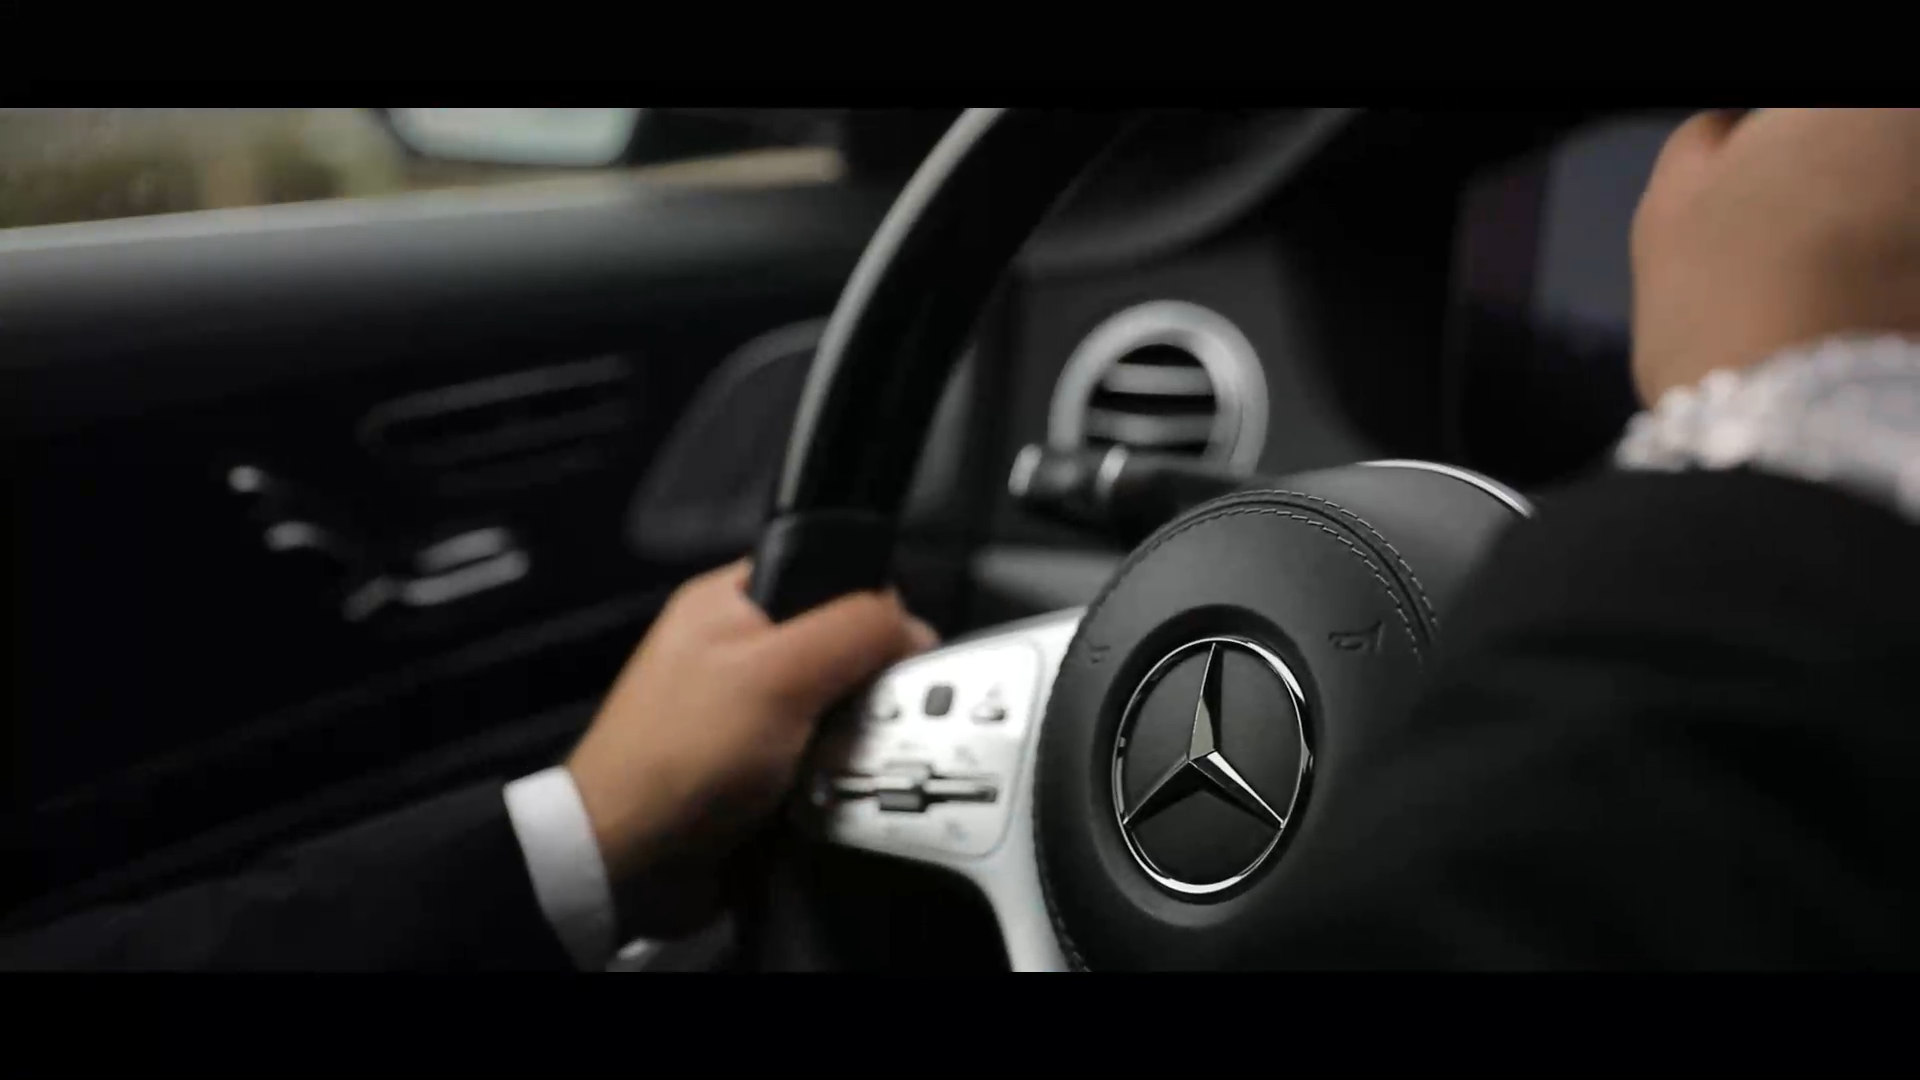 BNG Worldwide Chauffeur Services provides an upscale chauffeur service